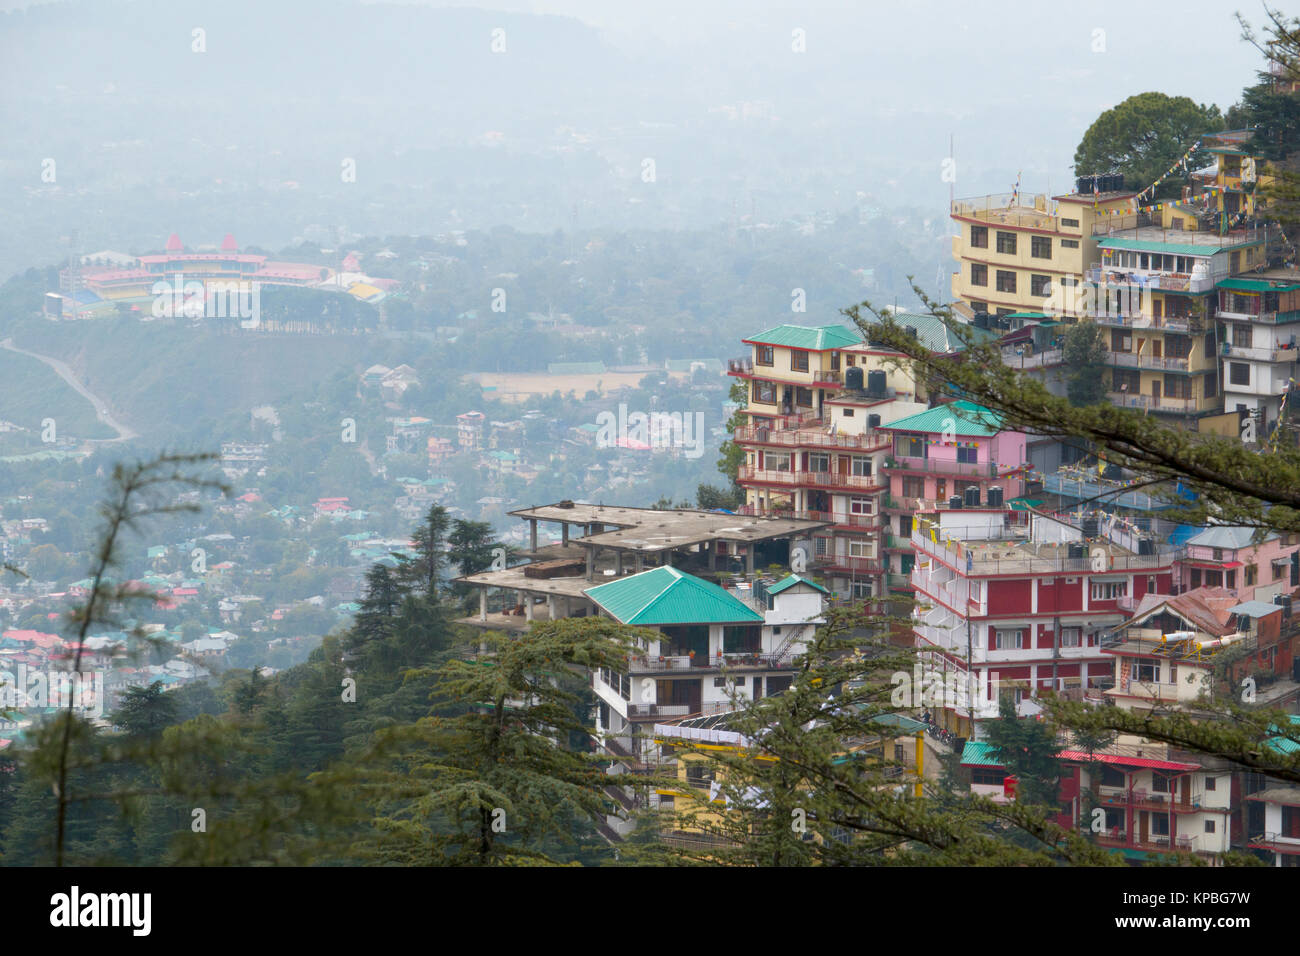 Hotels and apartments on hillside in Mcleod Ganj with Himachal Pradesh Cricket Association Stadium in Dharamshala below Stock Photo